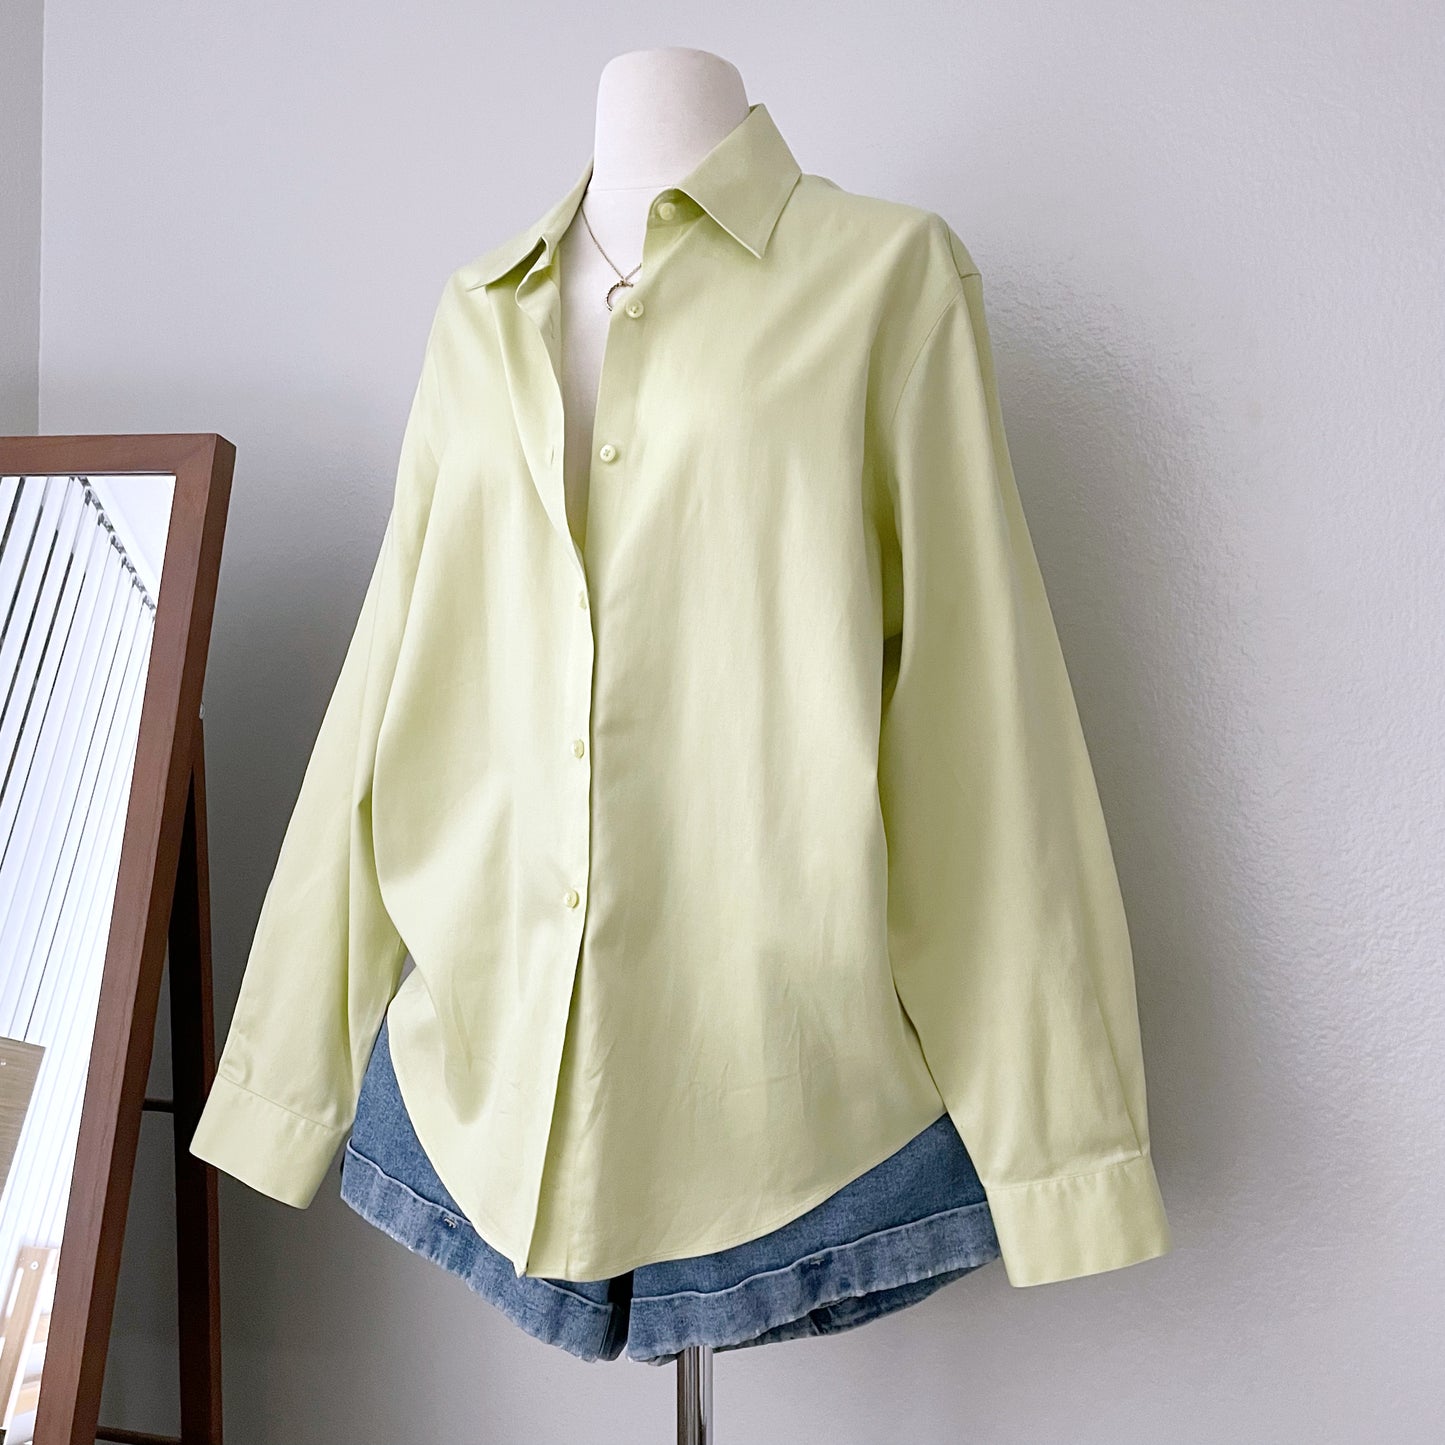 Green Vintage Button Front Top (14)